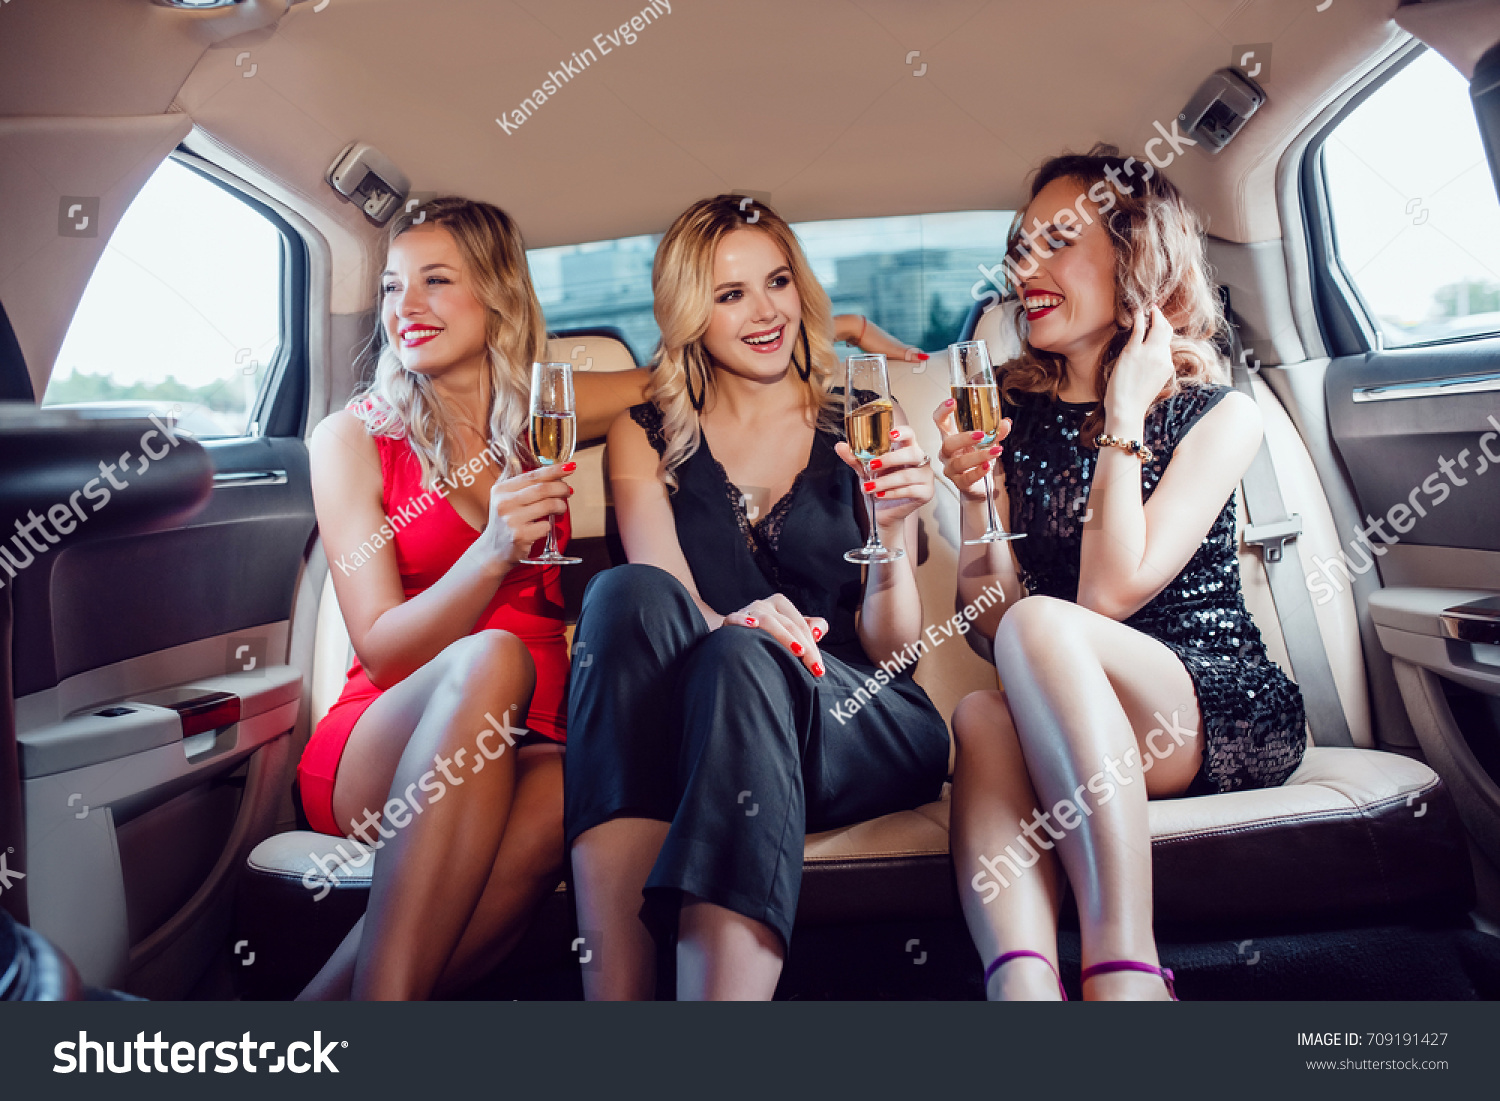 Pretty women having party in a limousine car and drinking champagne. #709191427